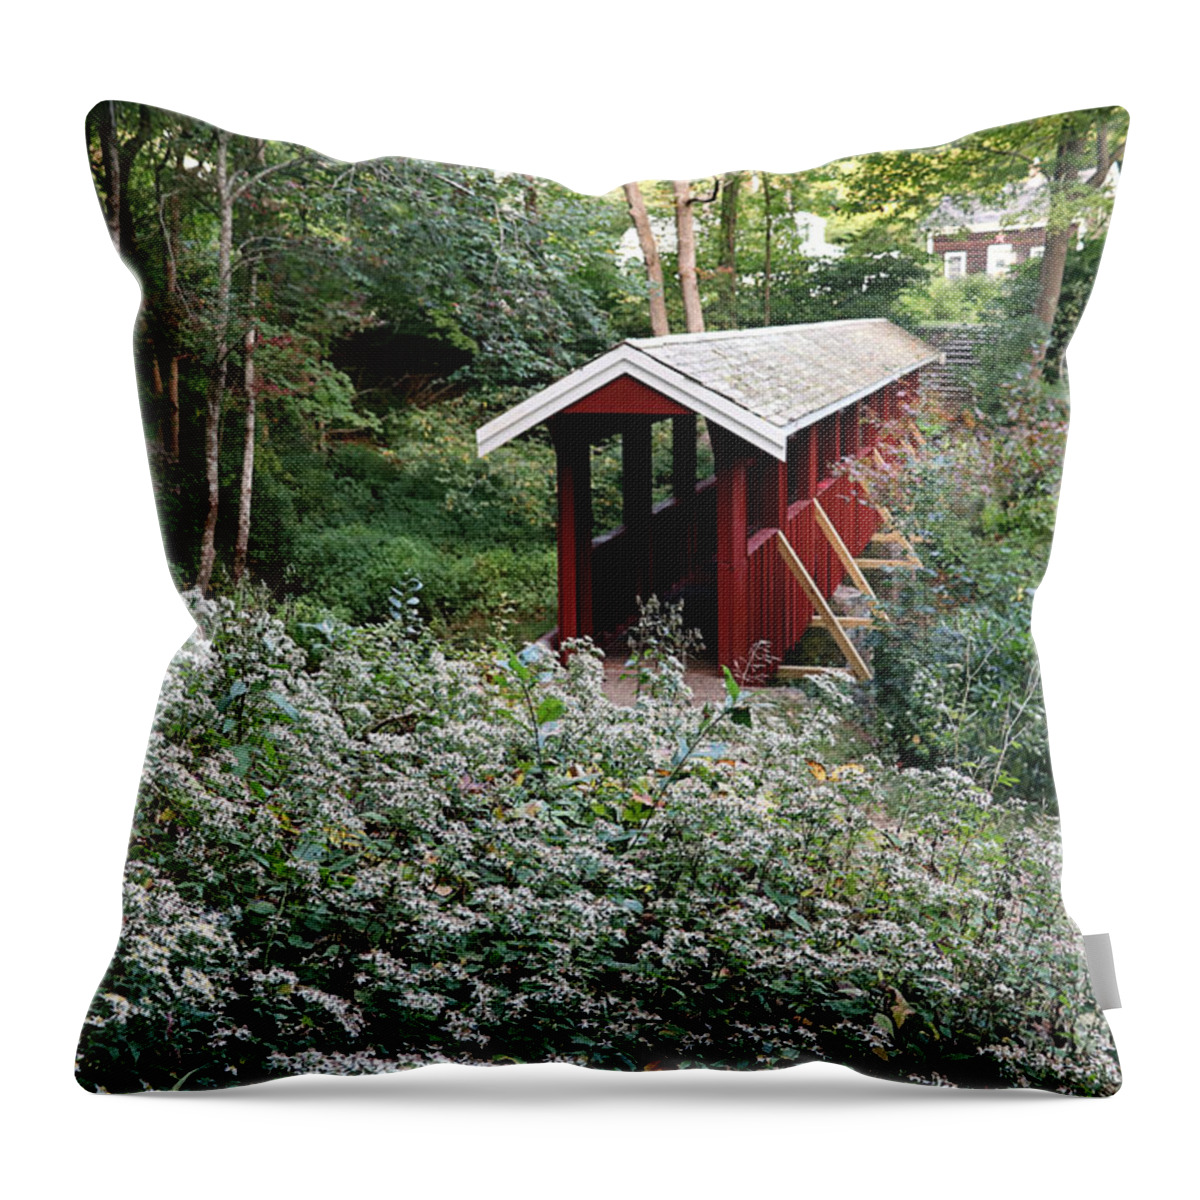 Covered Bridge Throw Pillow featuring the photograph Billington St Covered Bridge 2019 by Janice Drew